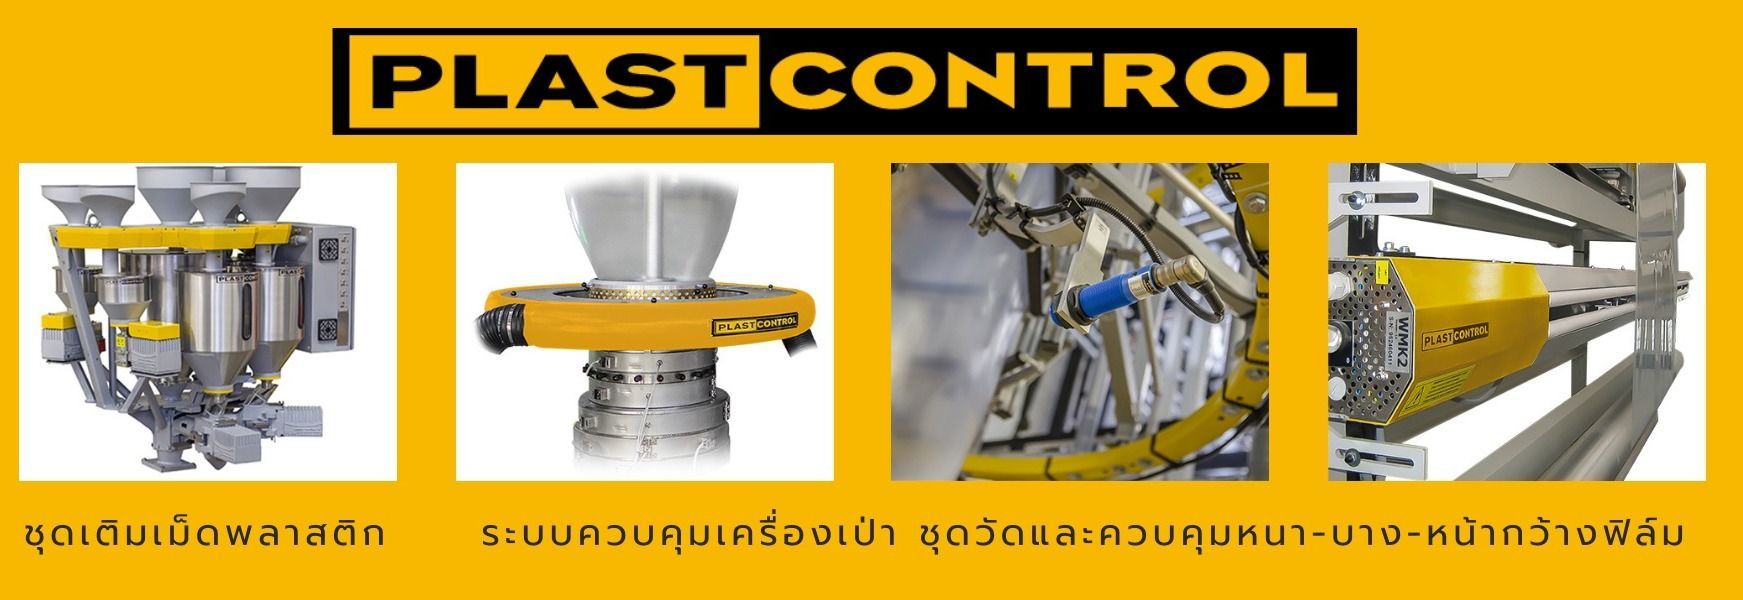 Process and Quality Control & Material Handling Systems Plast Control